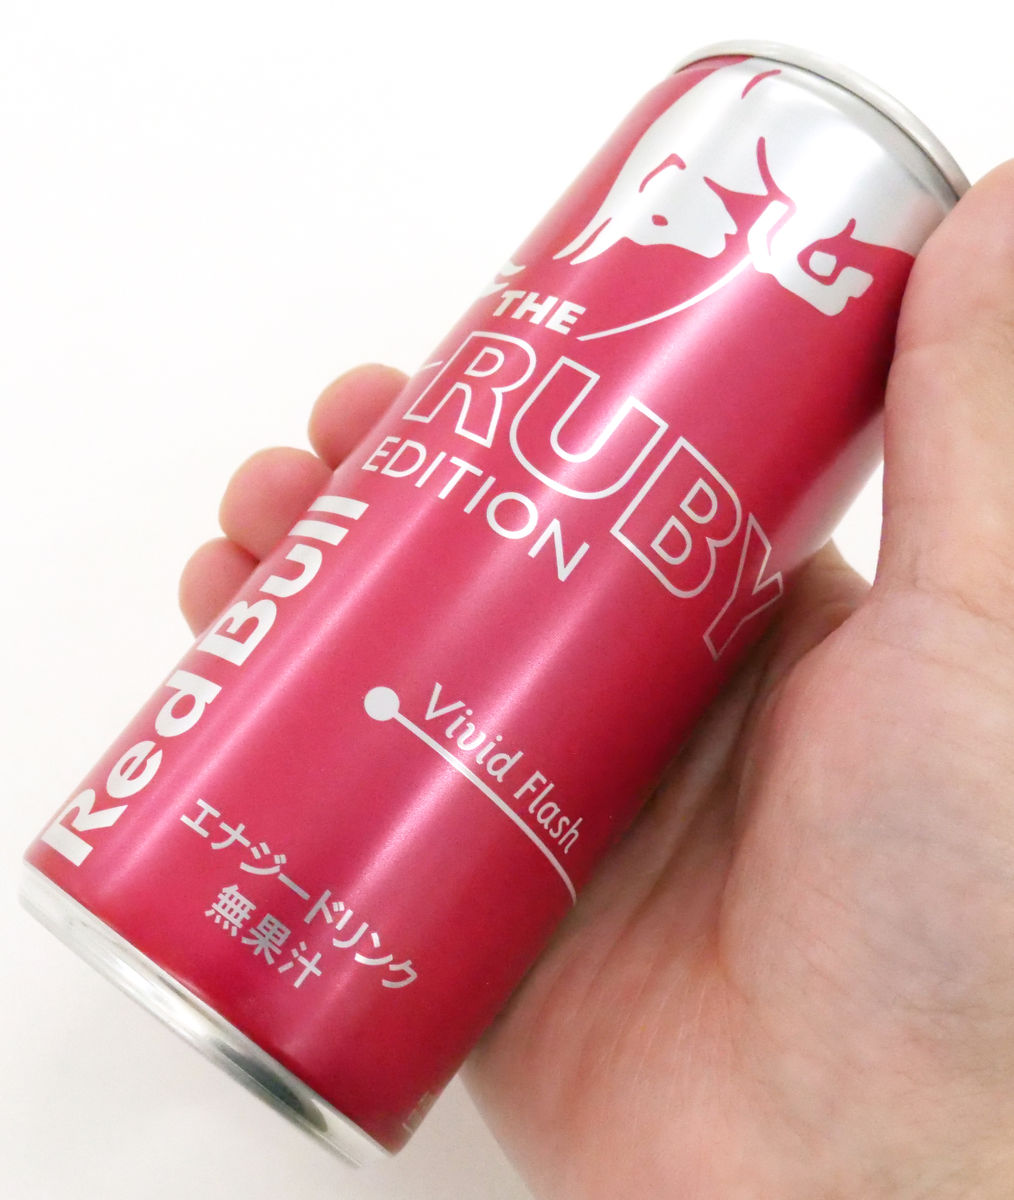 Red Bull Energy Drink Ruby Edition' tasting review full of 